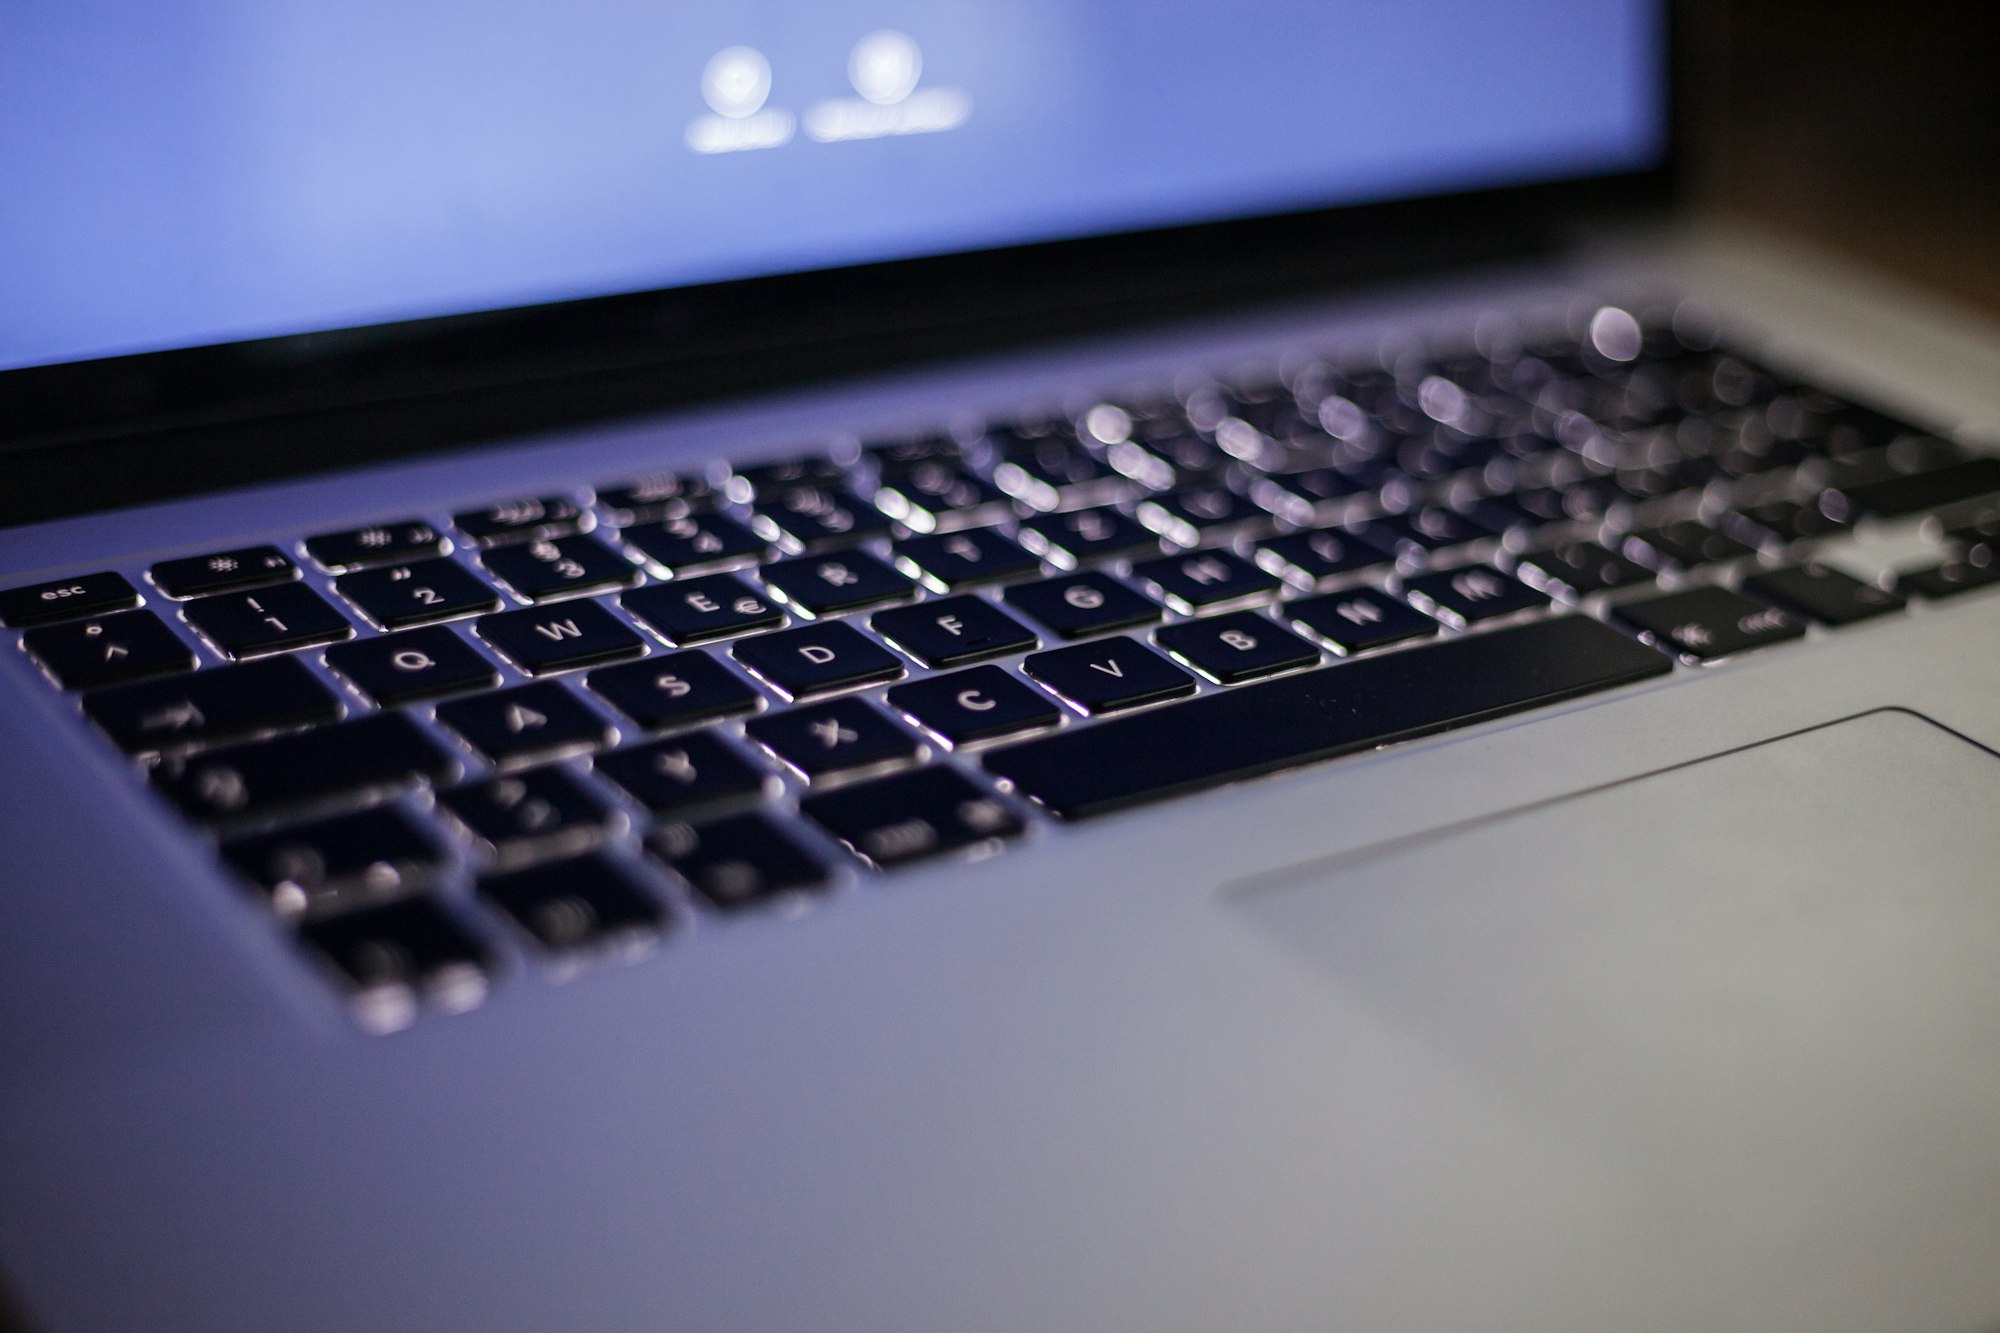 How to Find Forgotten Passwords on a MacBook